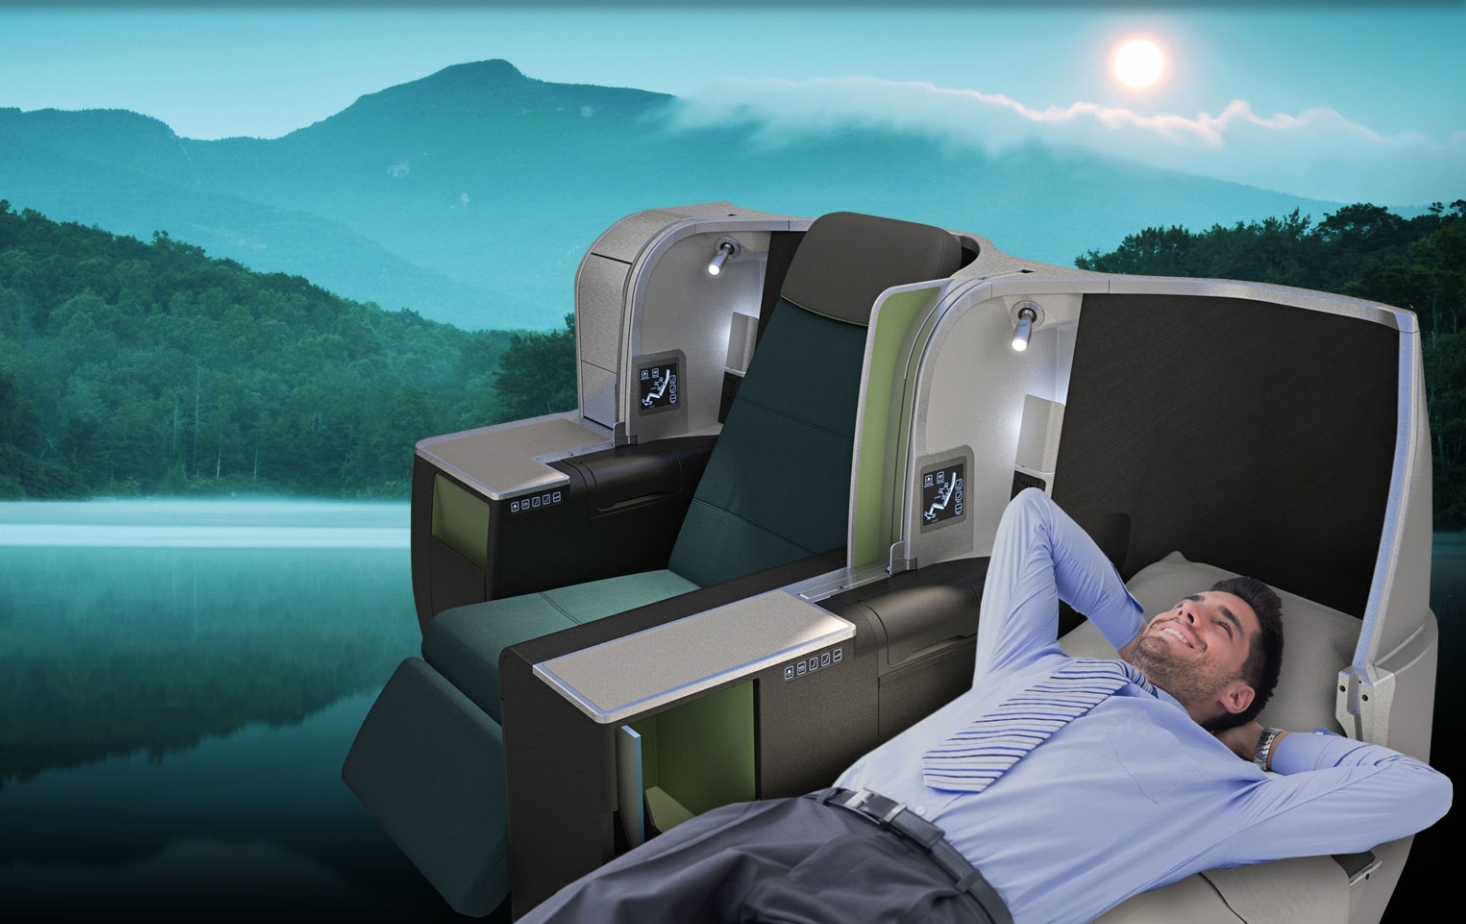 Aer Lingus’ new Business Class ticks many product and service innovation boxes